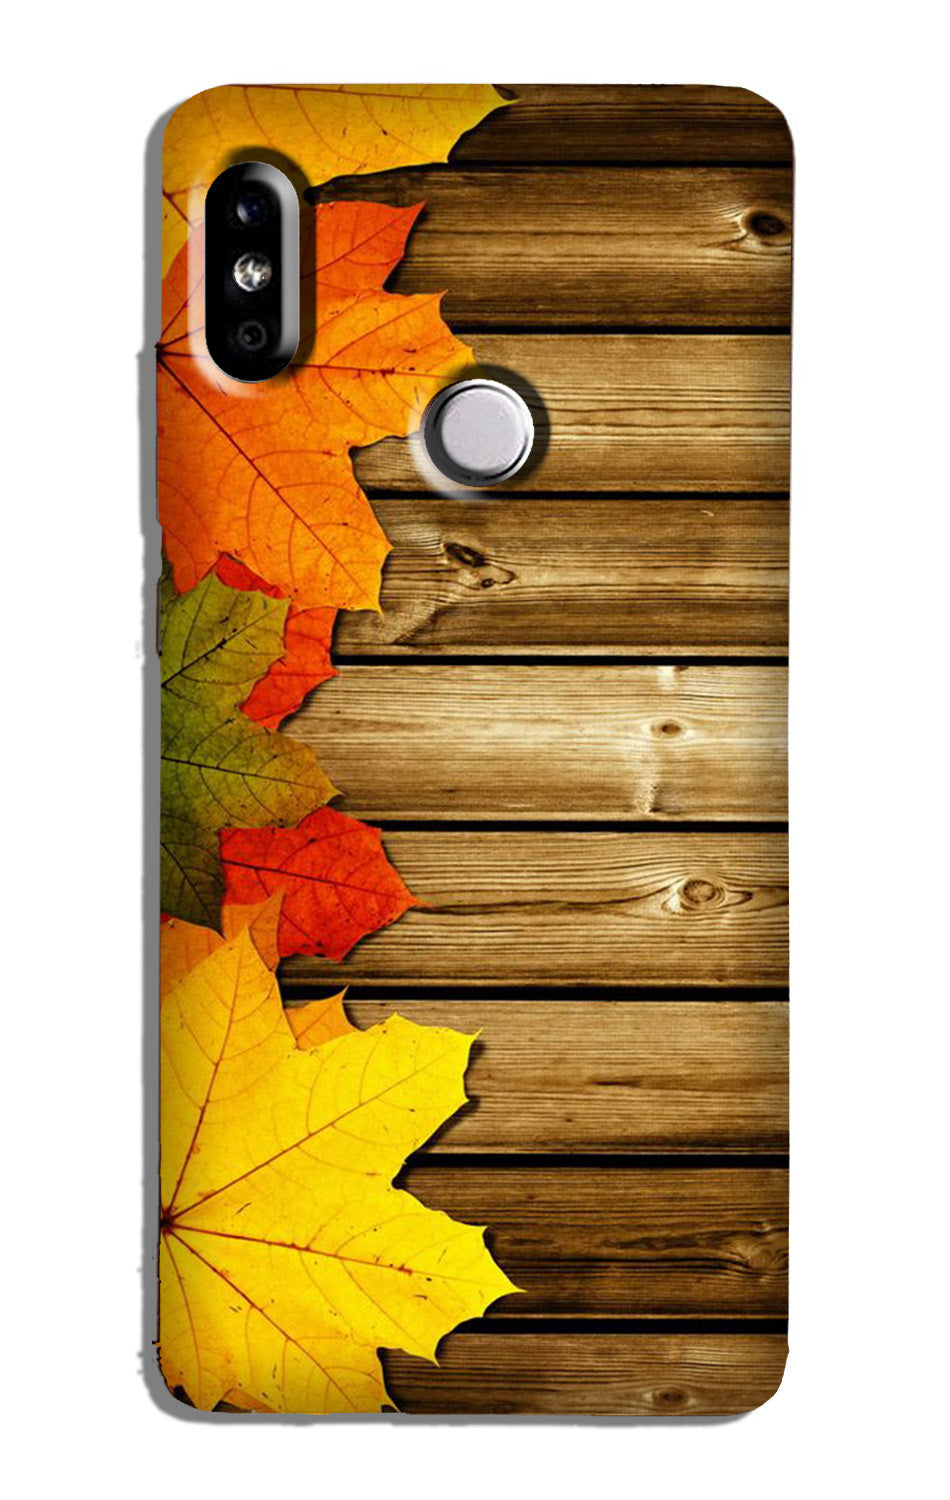 Wooden look3 Case for Redmi Note 6 Pro